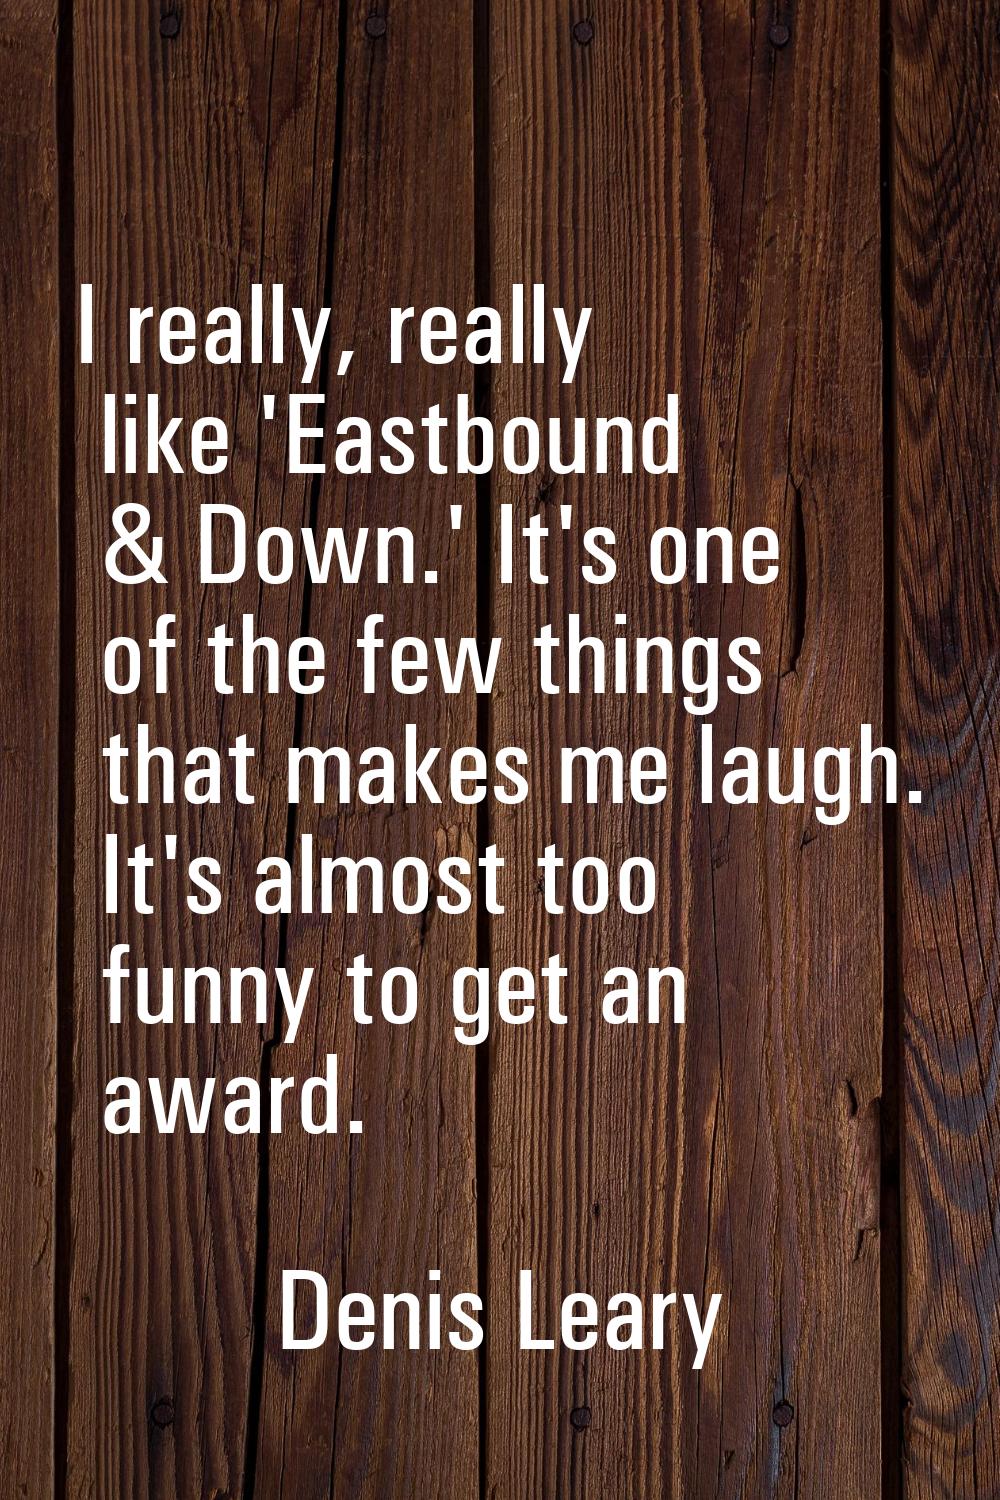 I really, really like 'Eastbound & Down.' It's one of the few things that makes me laugh. It's almo